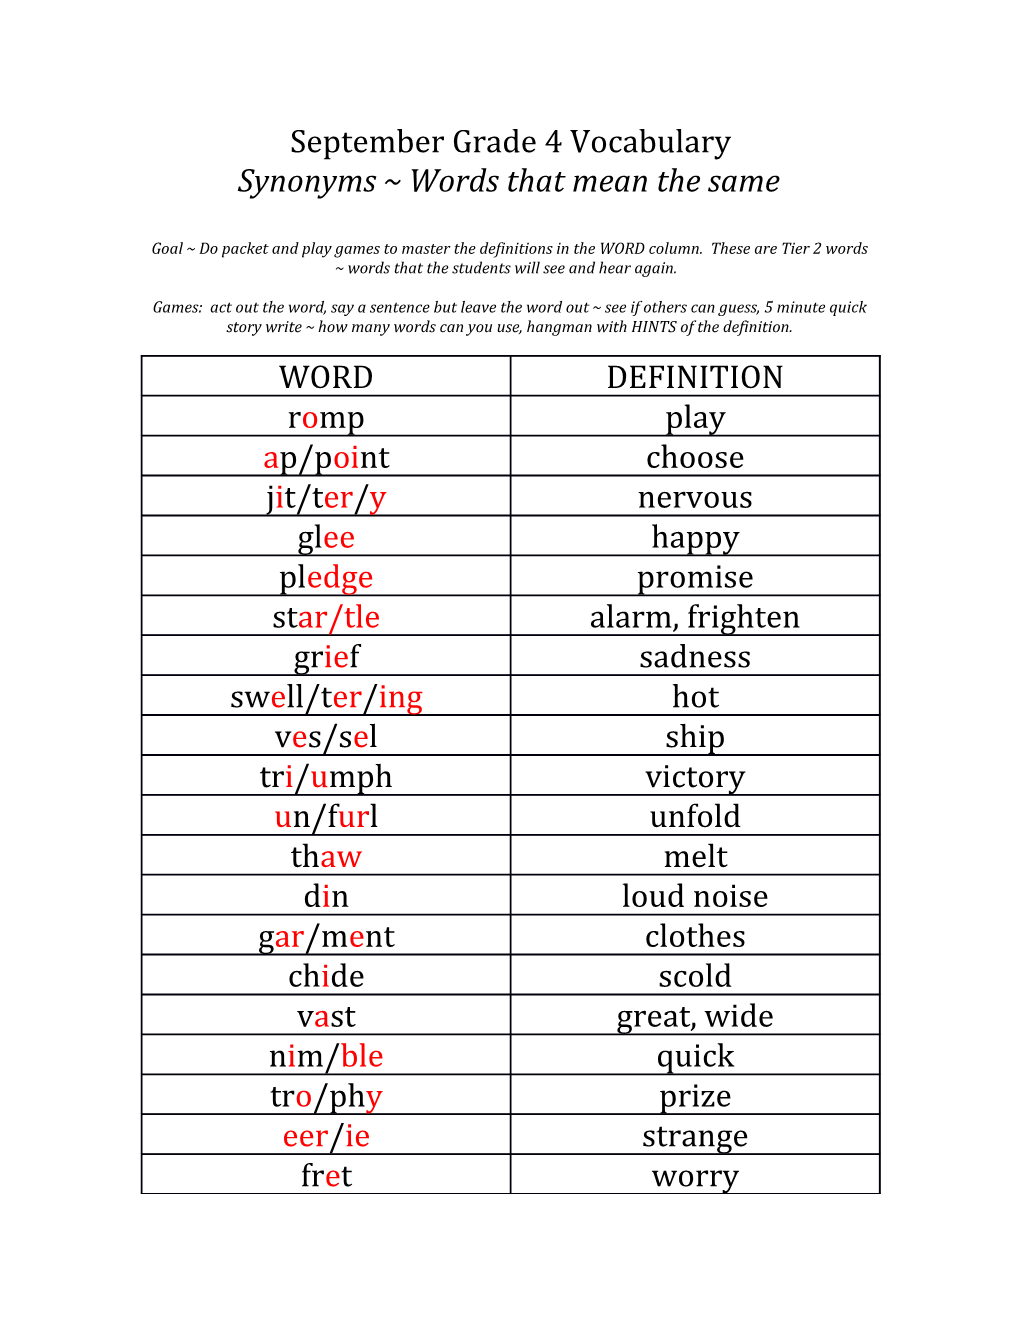 Synonyms Words That Mean the Same